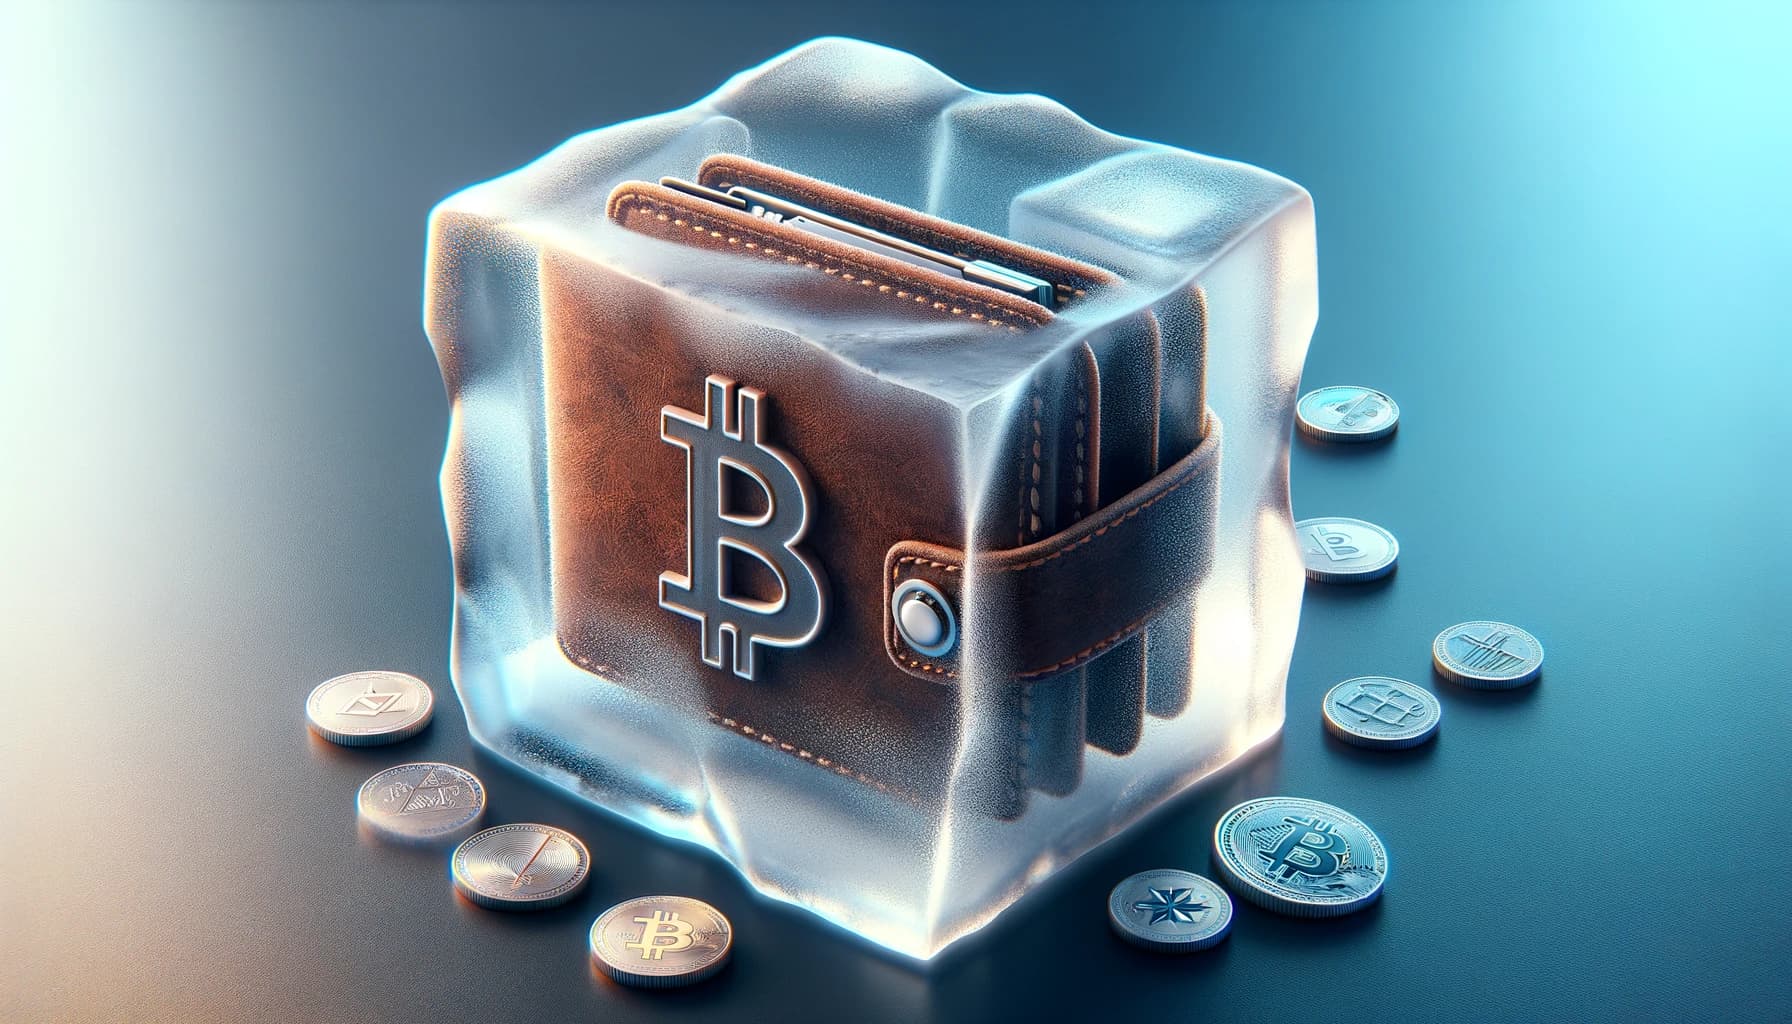 Bucket Technologies image showing a Bitcoin wallet frozen in an ice cube surrounded by gold coins.